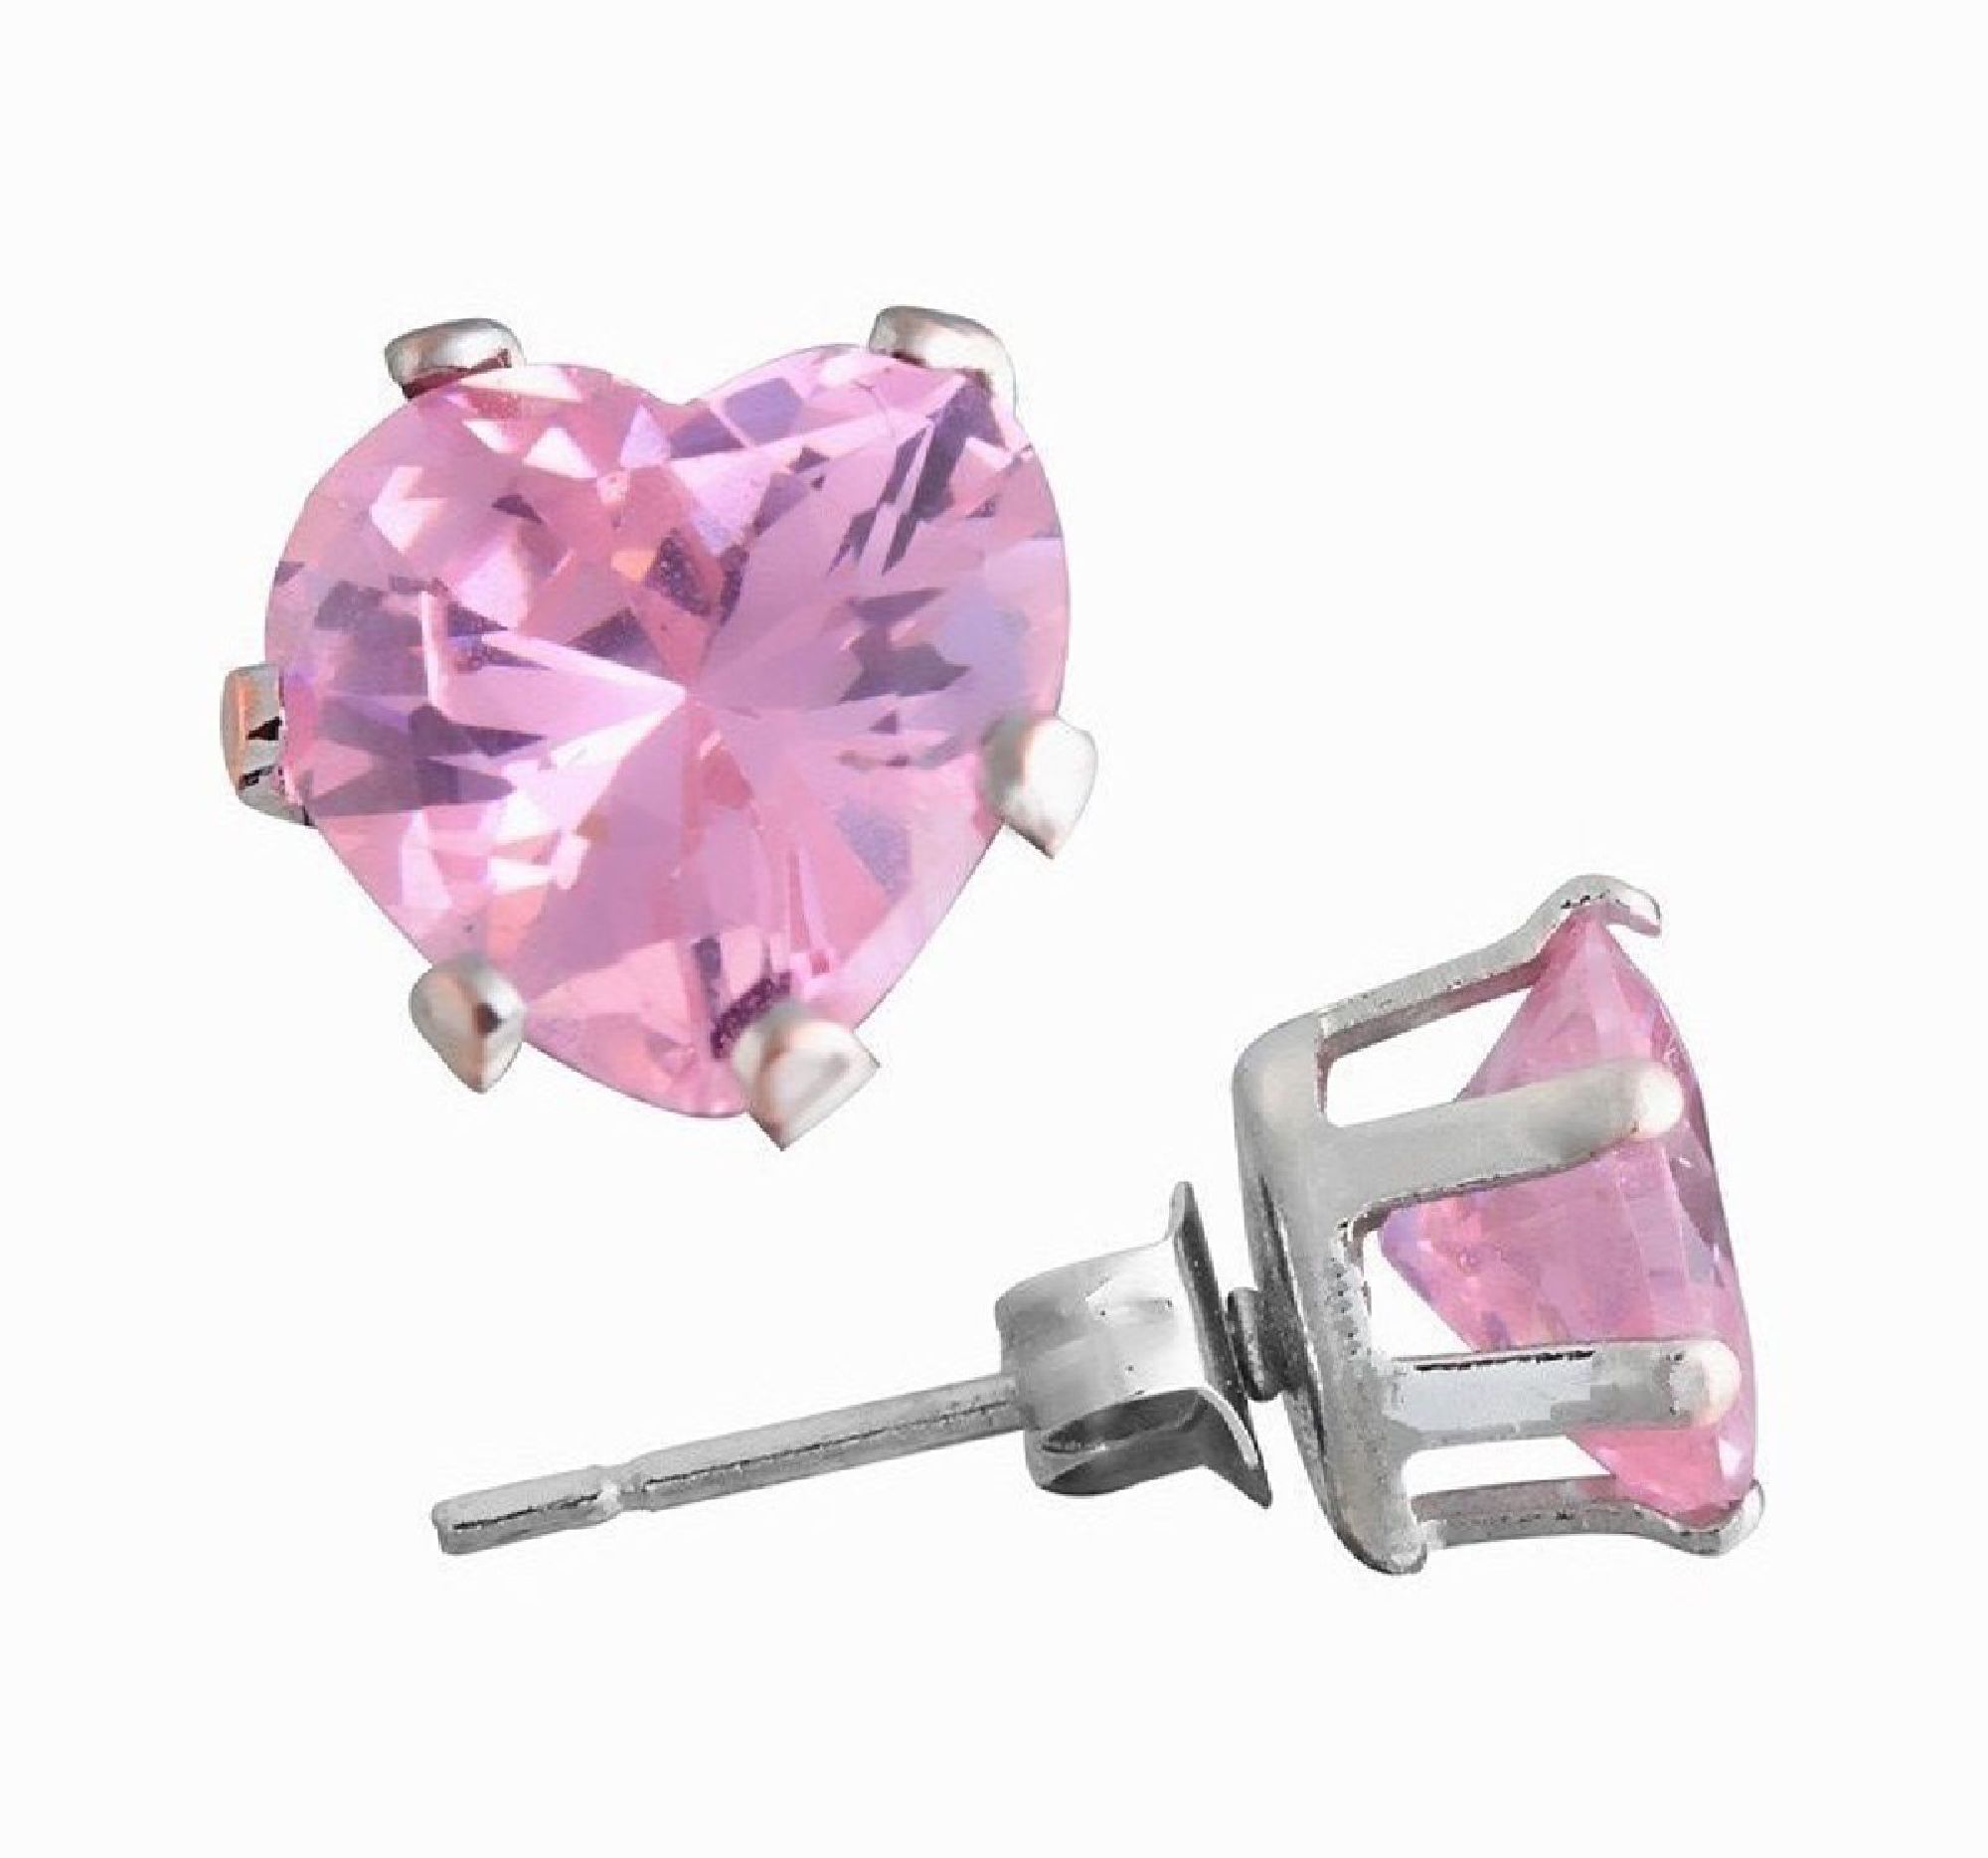 ParisJewelry.com 3 Carat Heart Shape Pink Diamond manmade Stud Earrings for Woman in 14k White Gold over Sterling Silver Designed in France